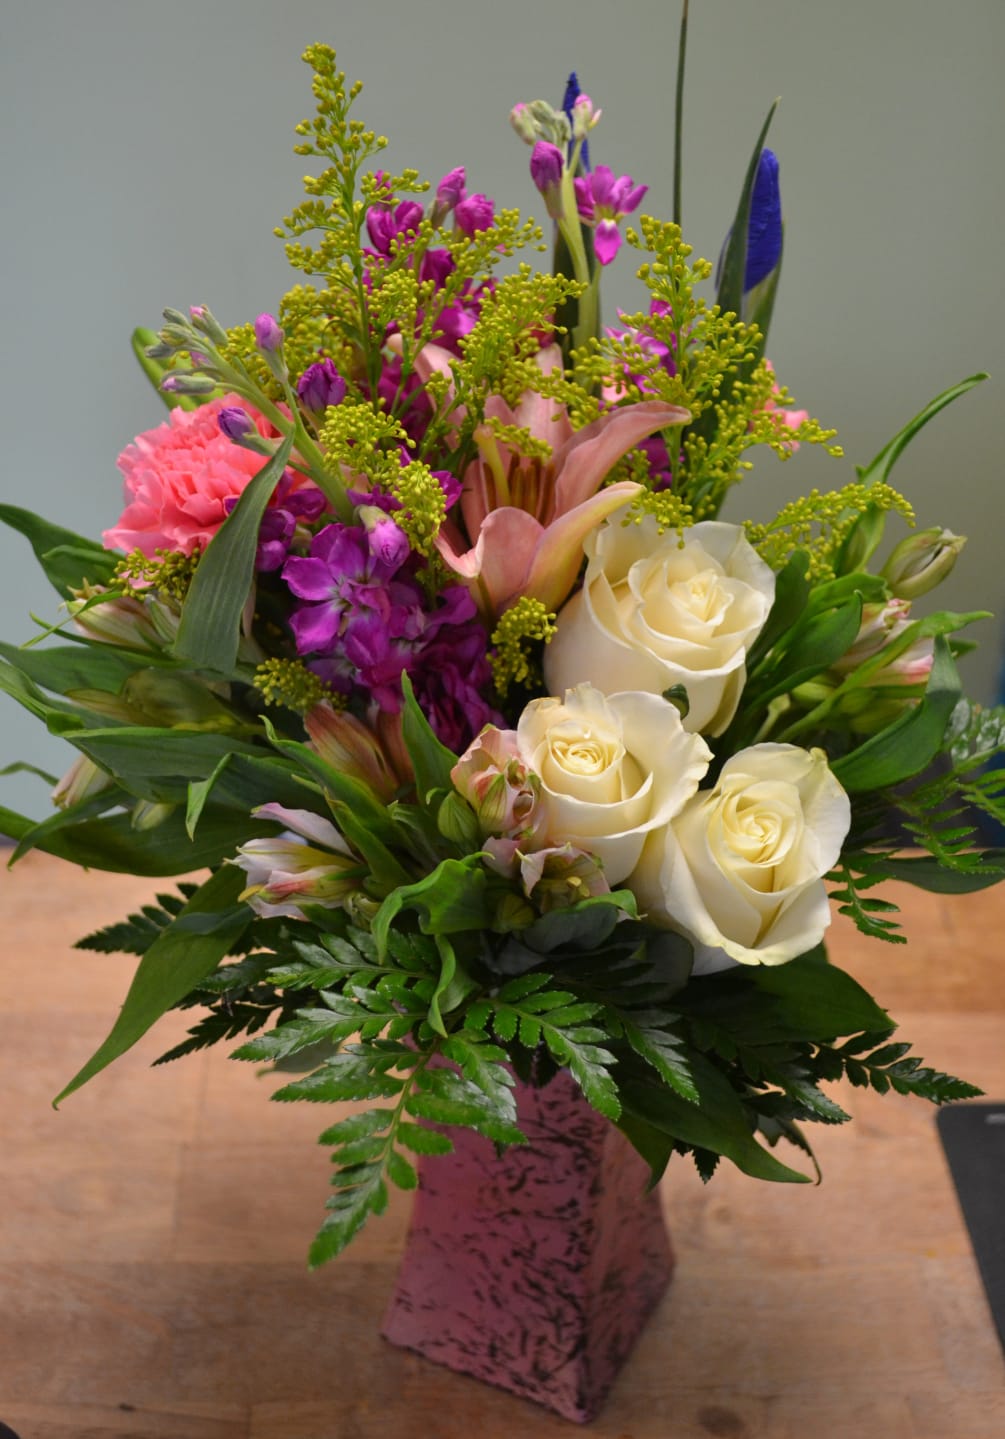 This incredible arrangement in a stunning and unusual pink vase includes white